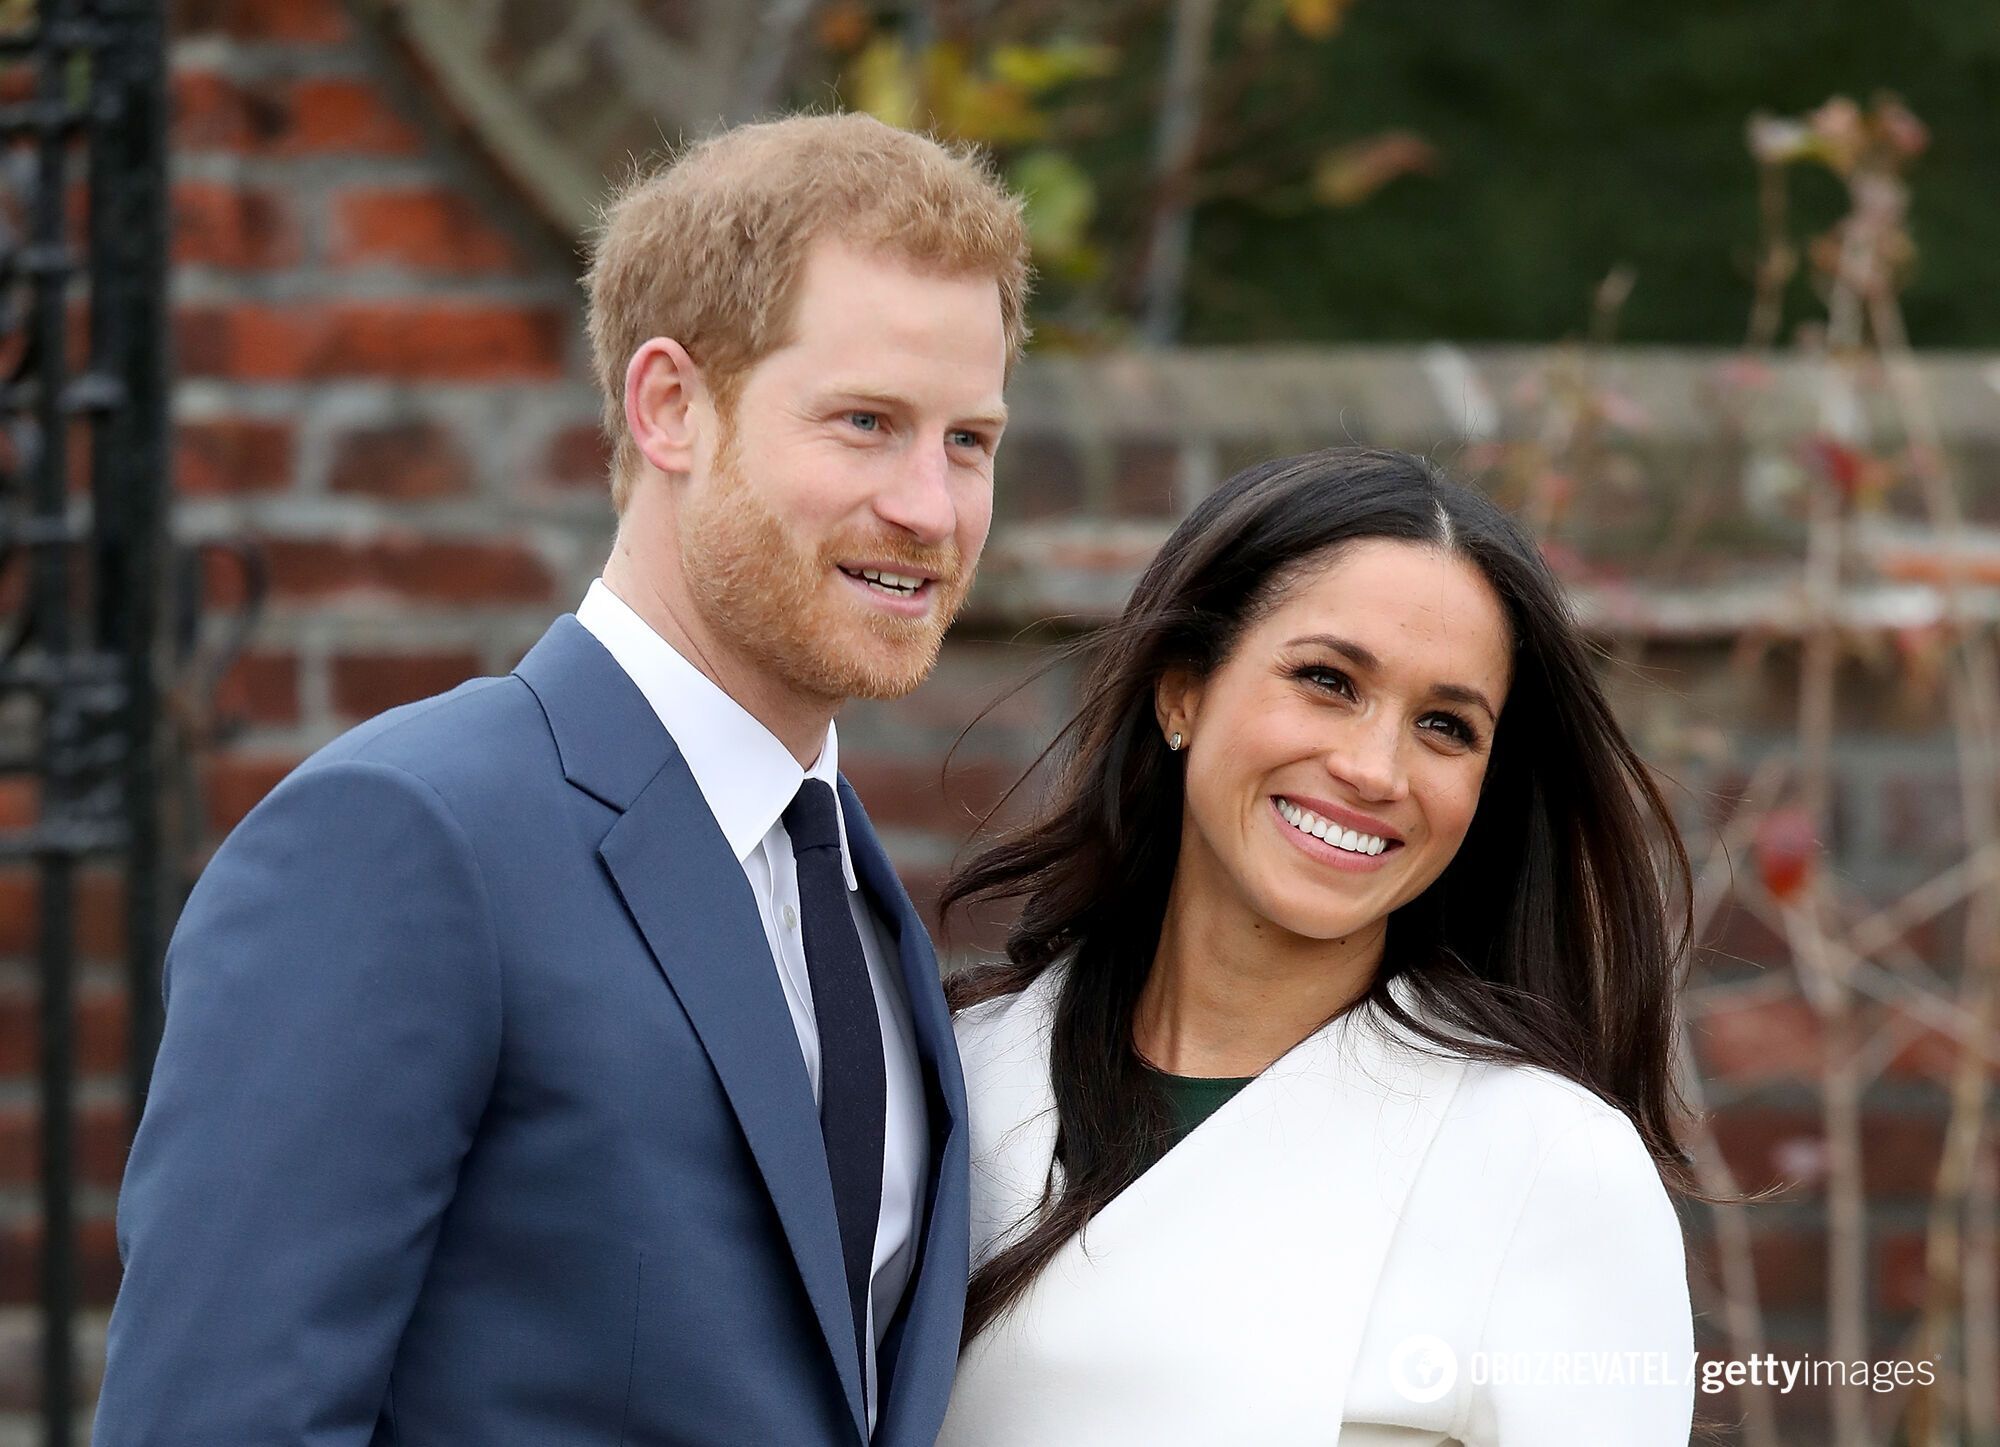 Prince Harry and Meghan Markle on the verge of divorce - media